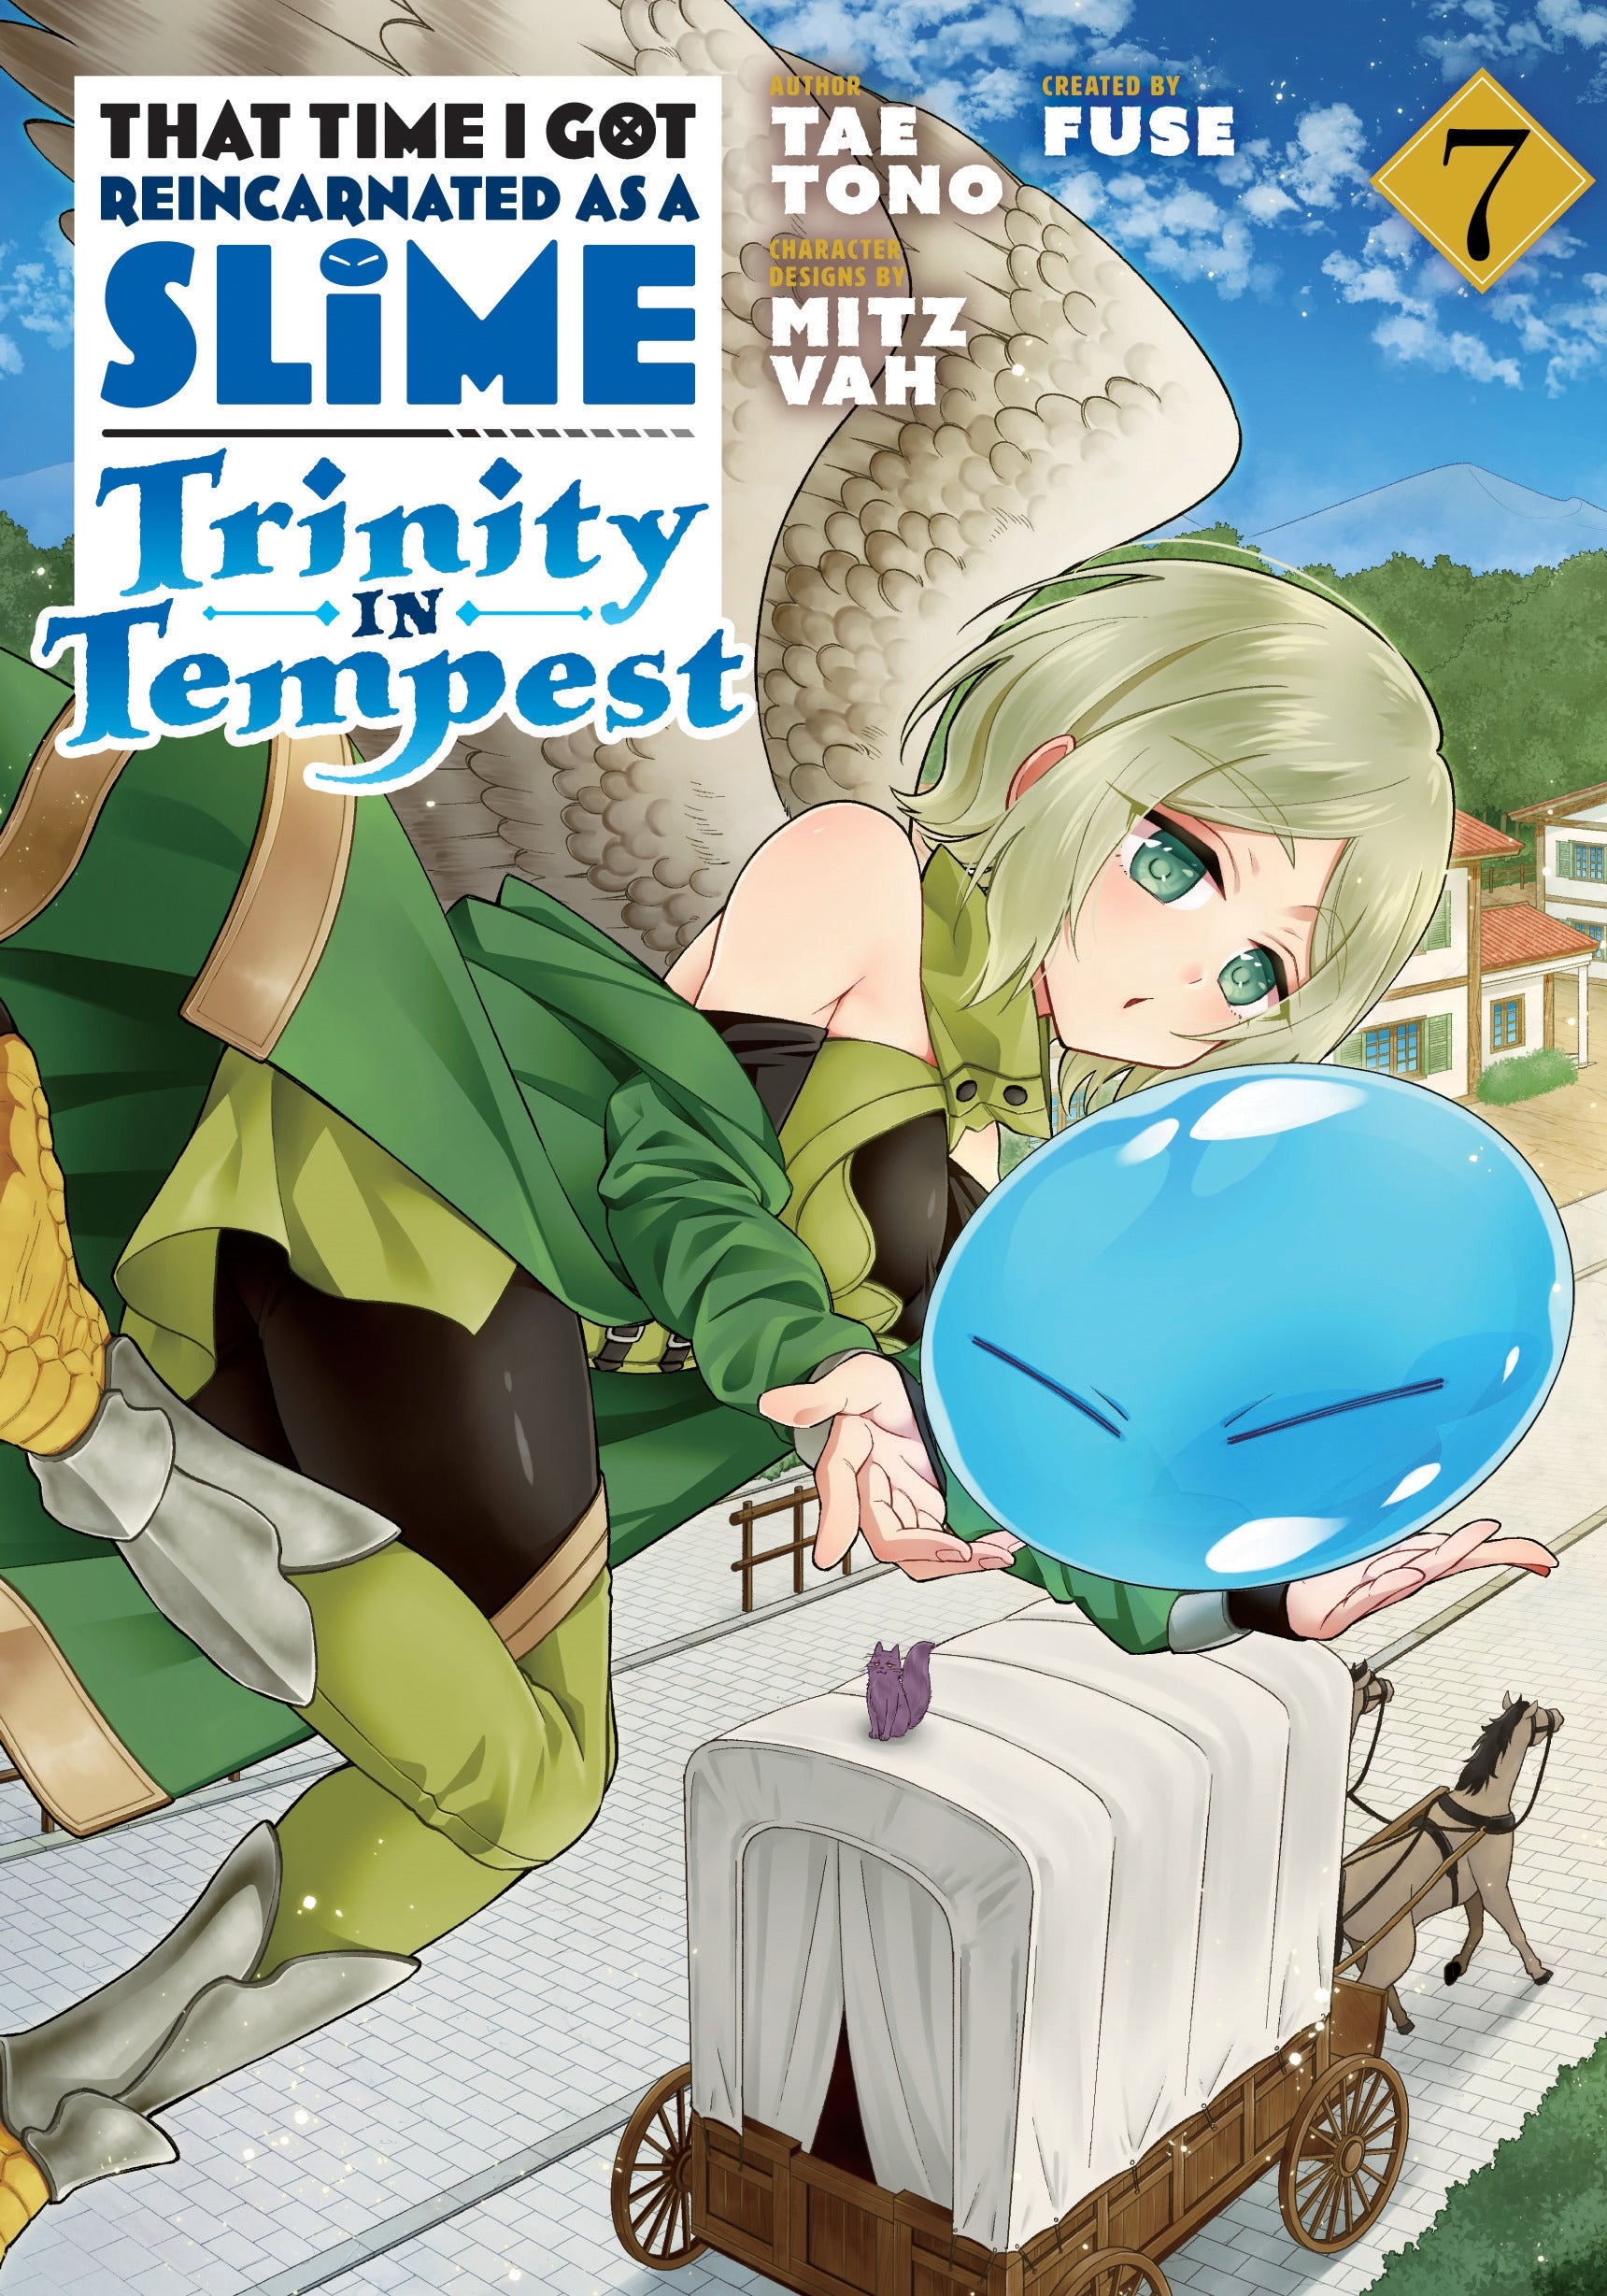 That Time I Got Reincarnated as a Slime Trinity in Tempest (Manga) Vol. 7